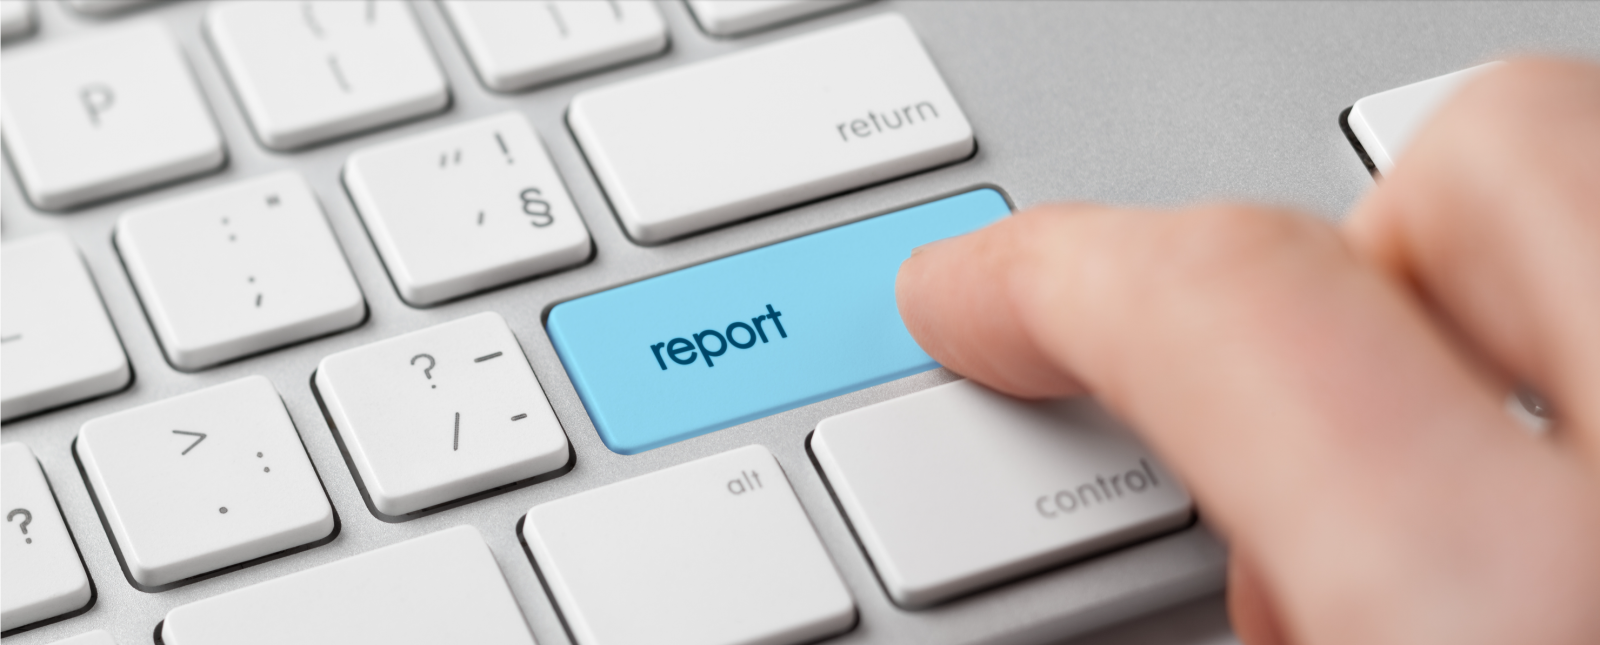 7 Mandatory Breach Reporting Requirements and Examples — Ontario